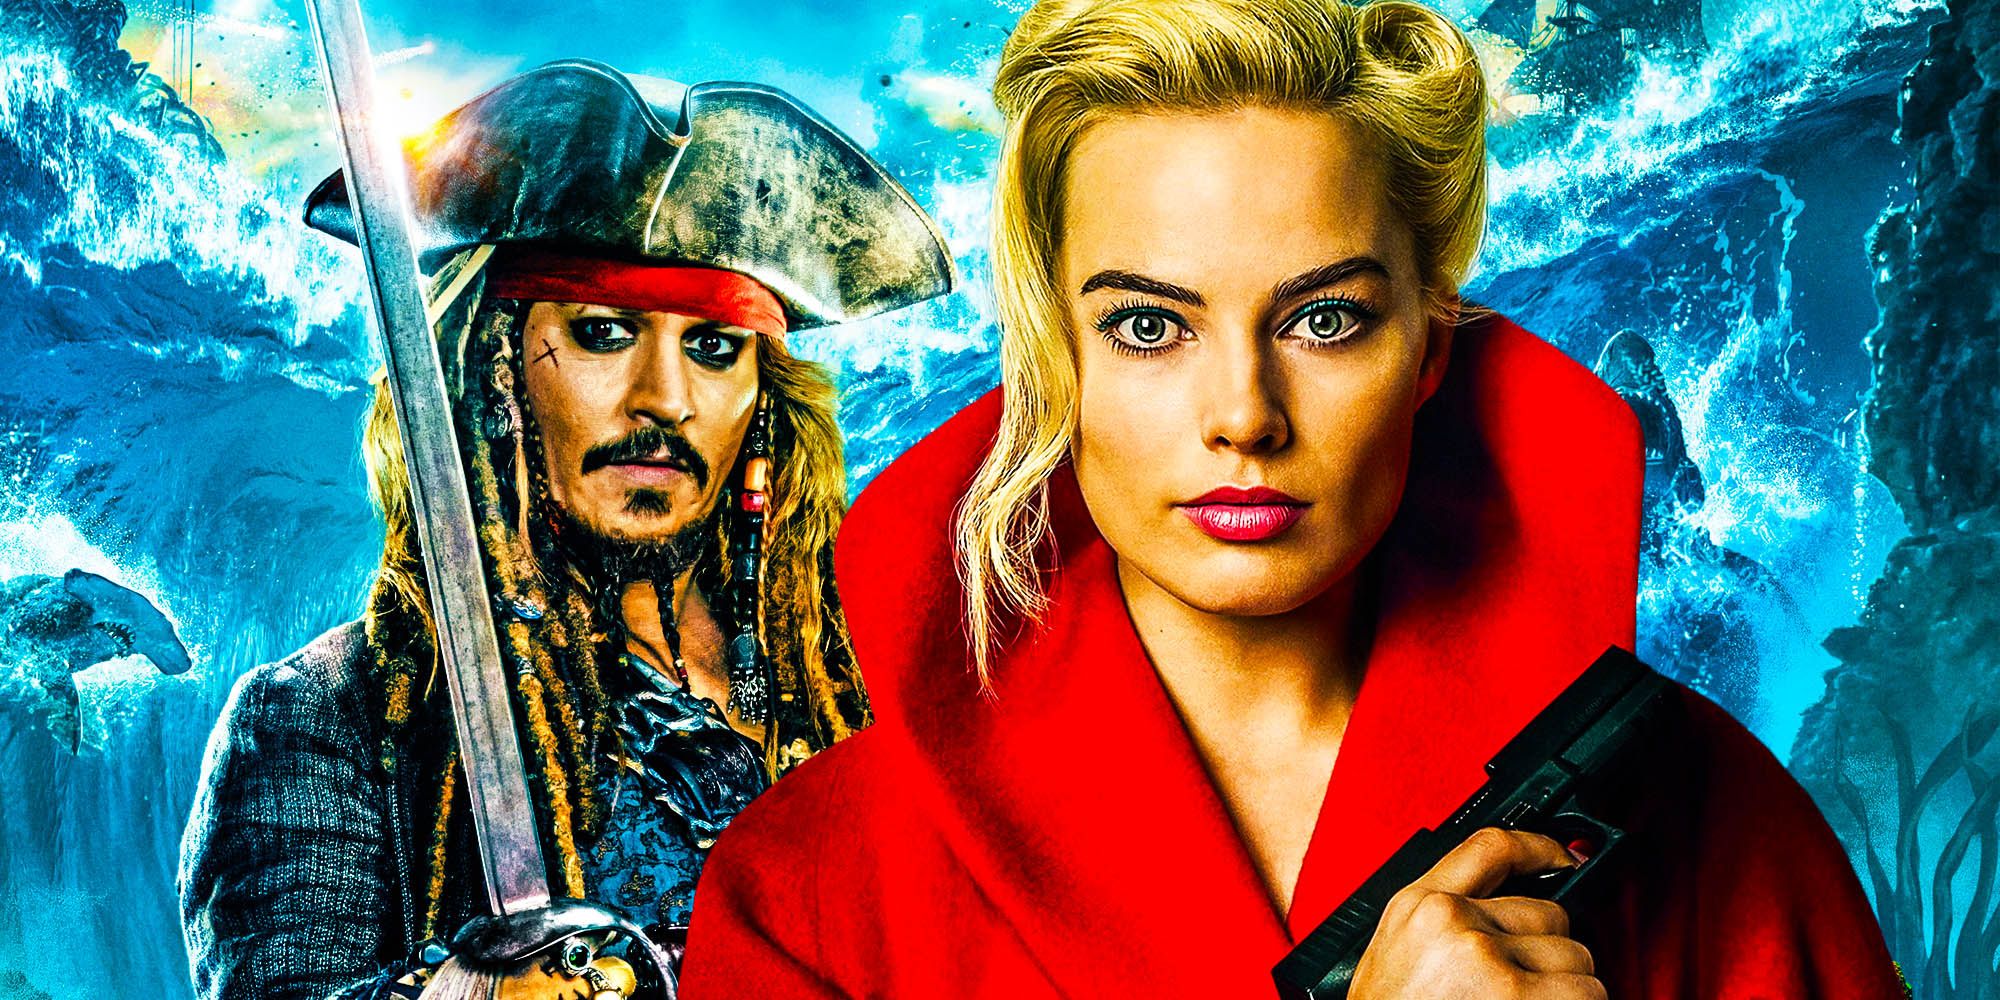 pirates of the Caribbean Margot Robbie reboot repeating series mistake johnny depp captain jack sparrow